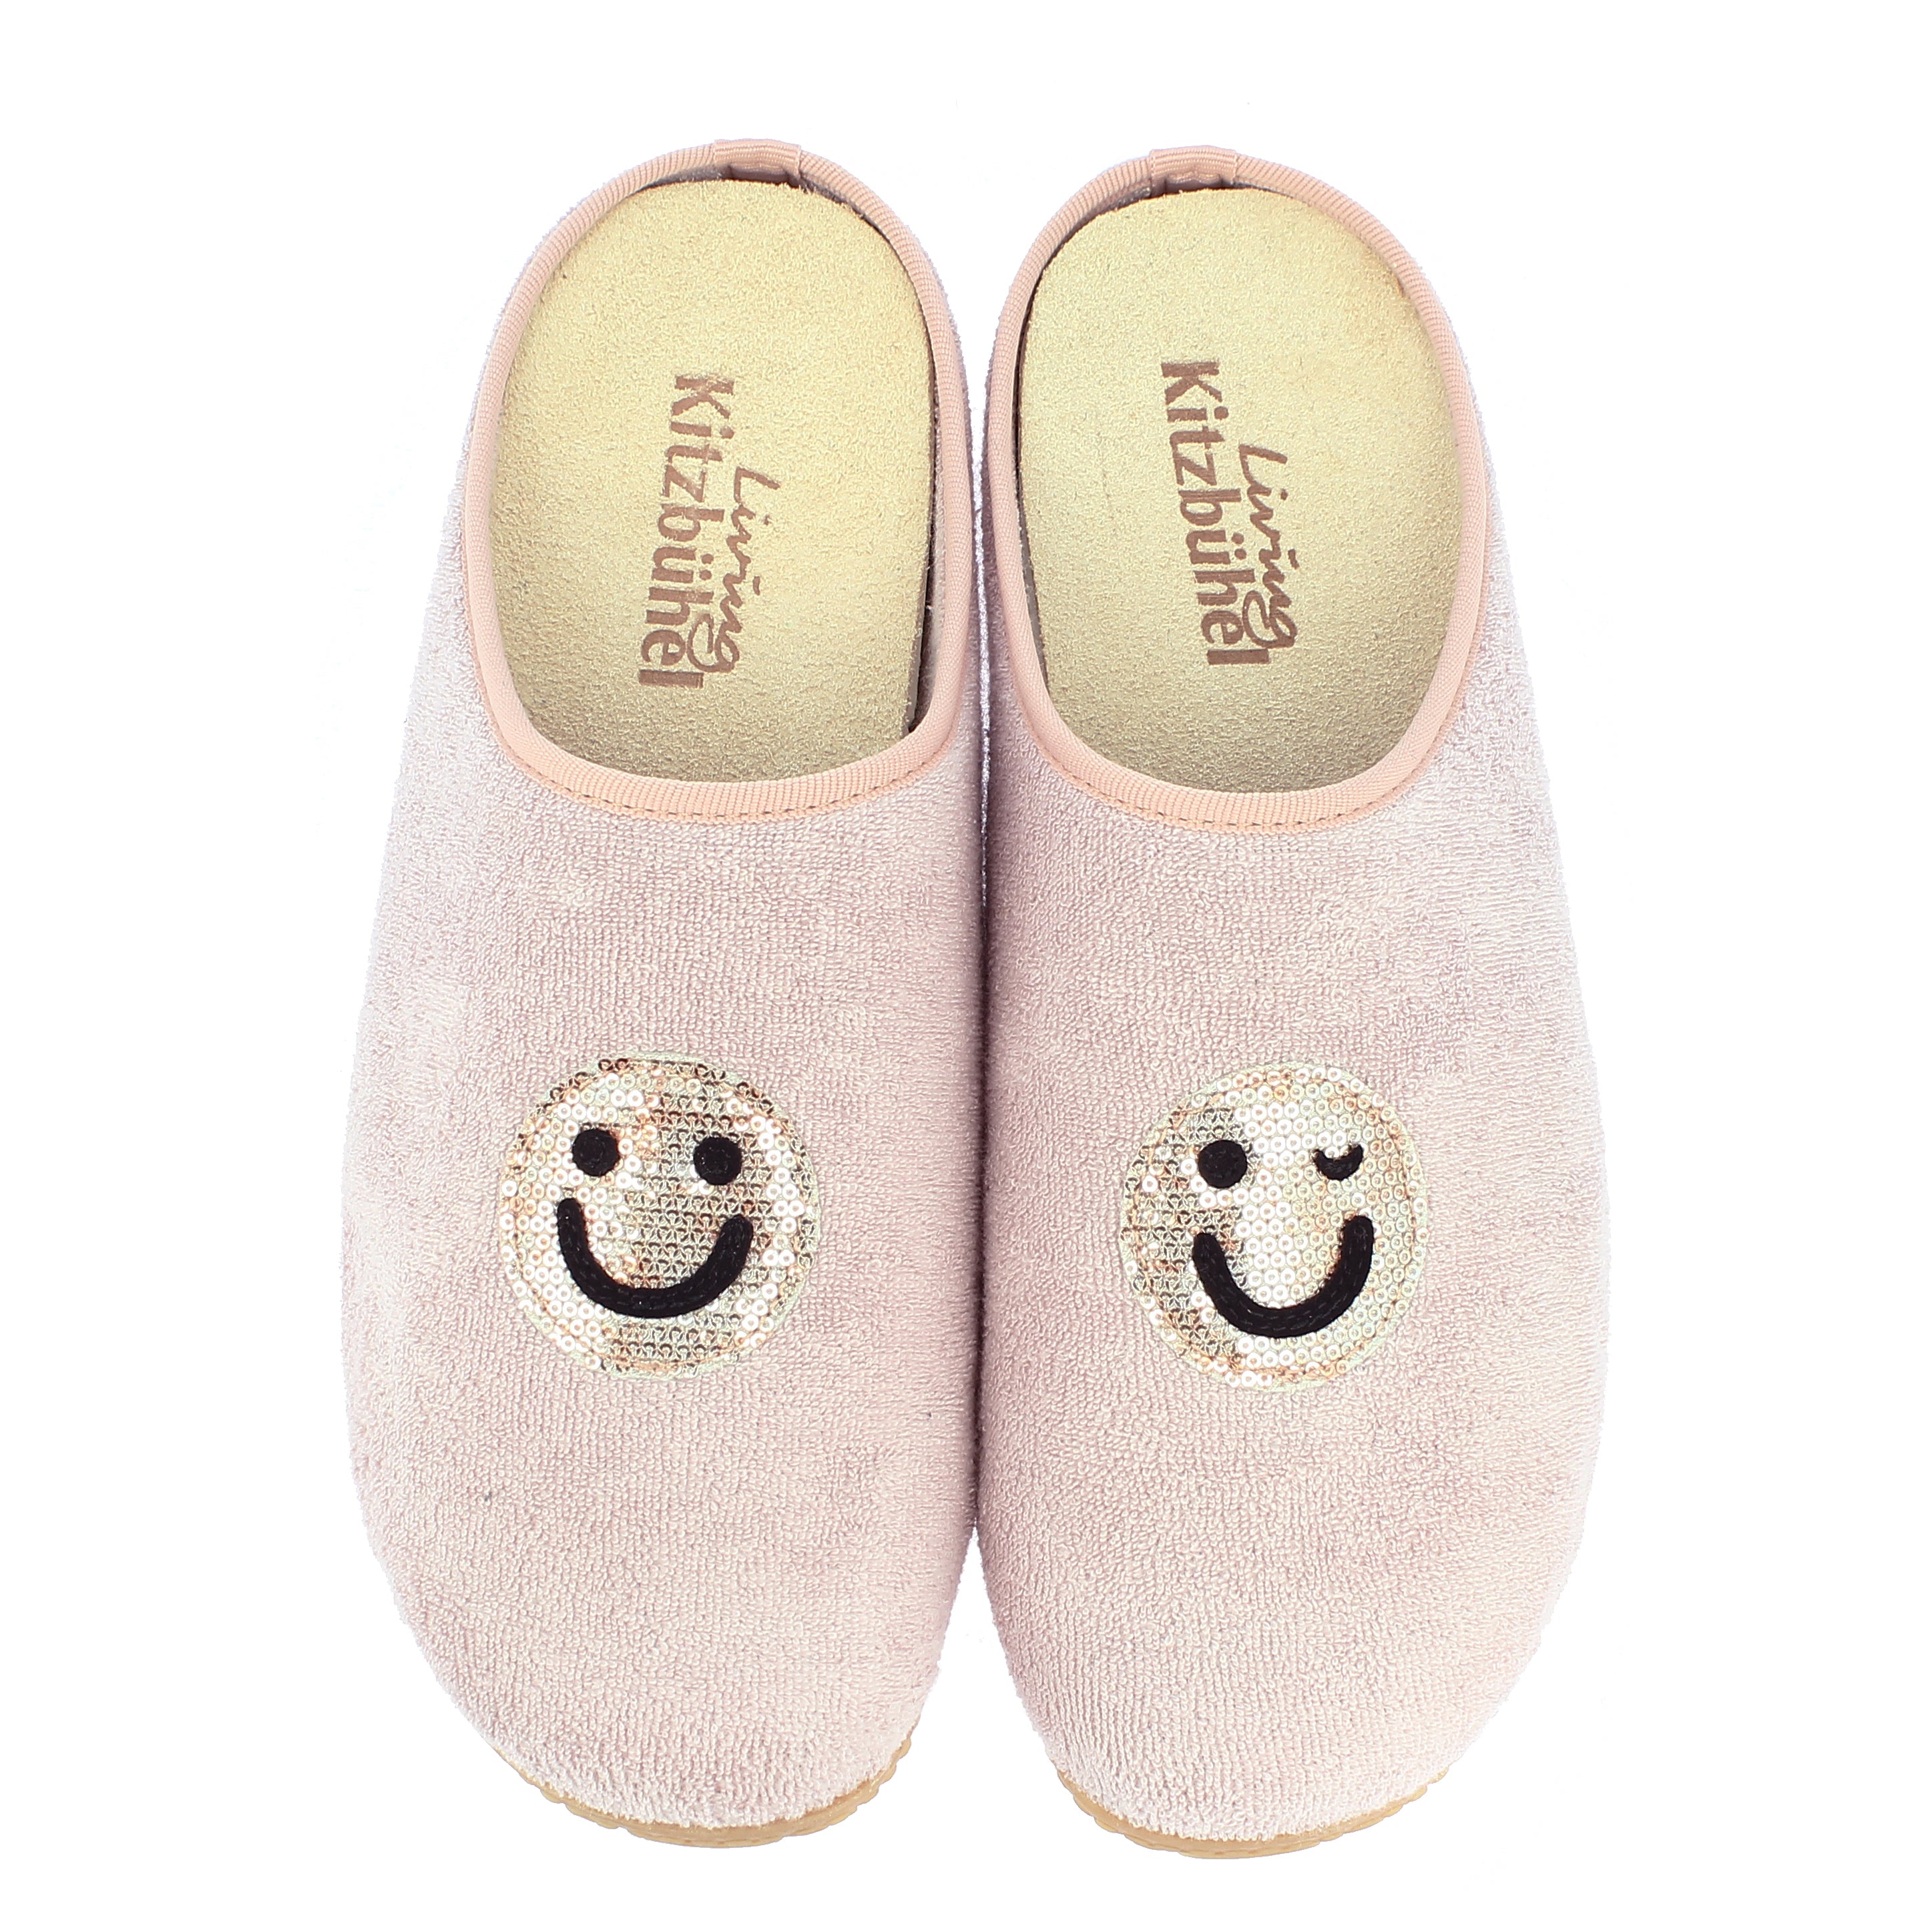 Pantoffel Frottee Smiley